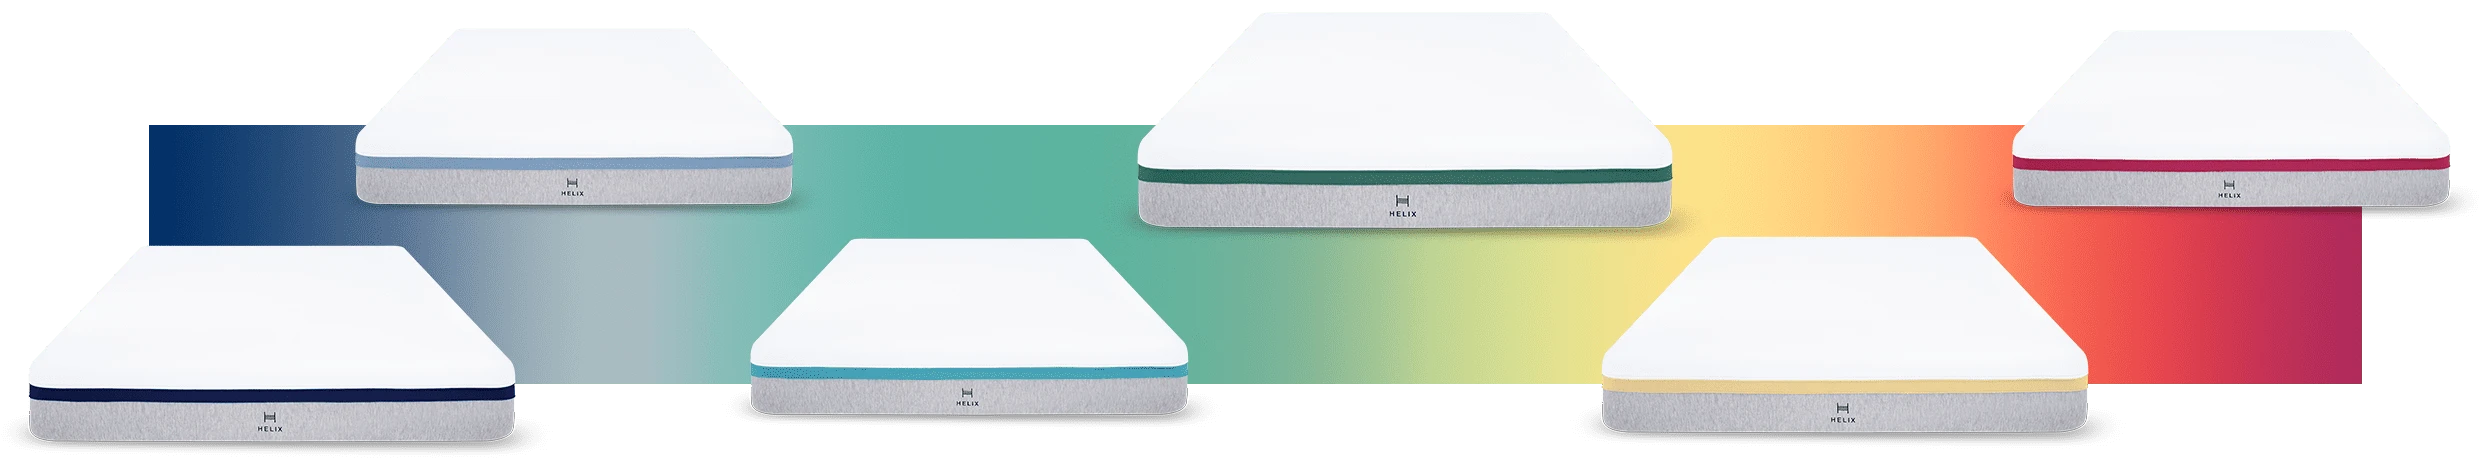 what helix luxe mattress should i choose